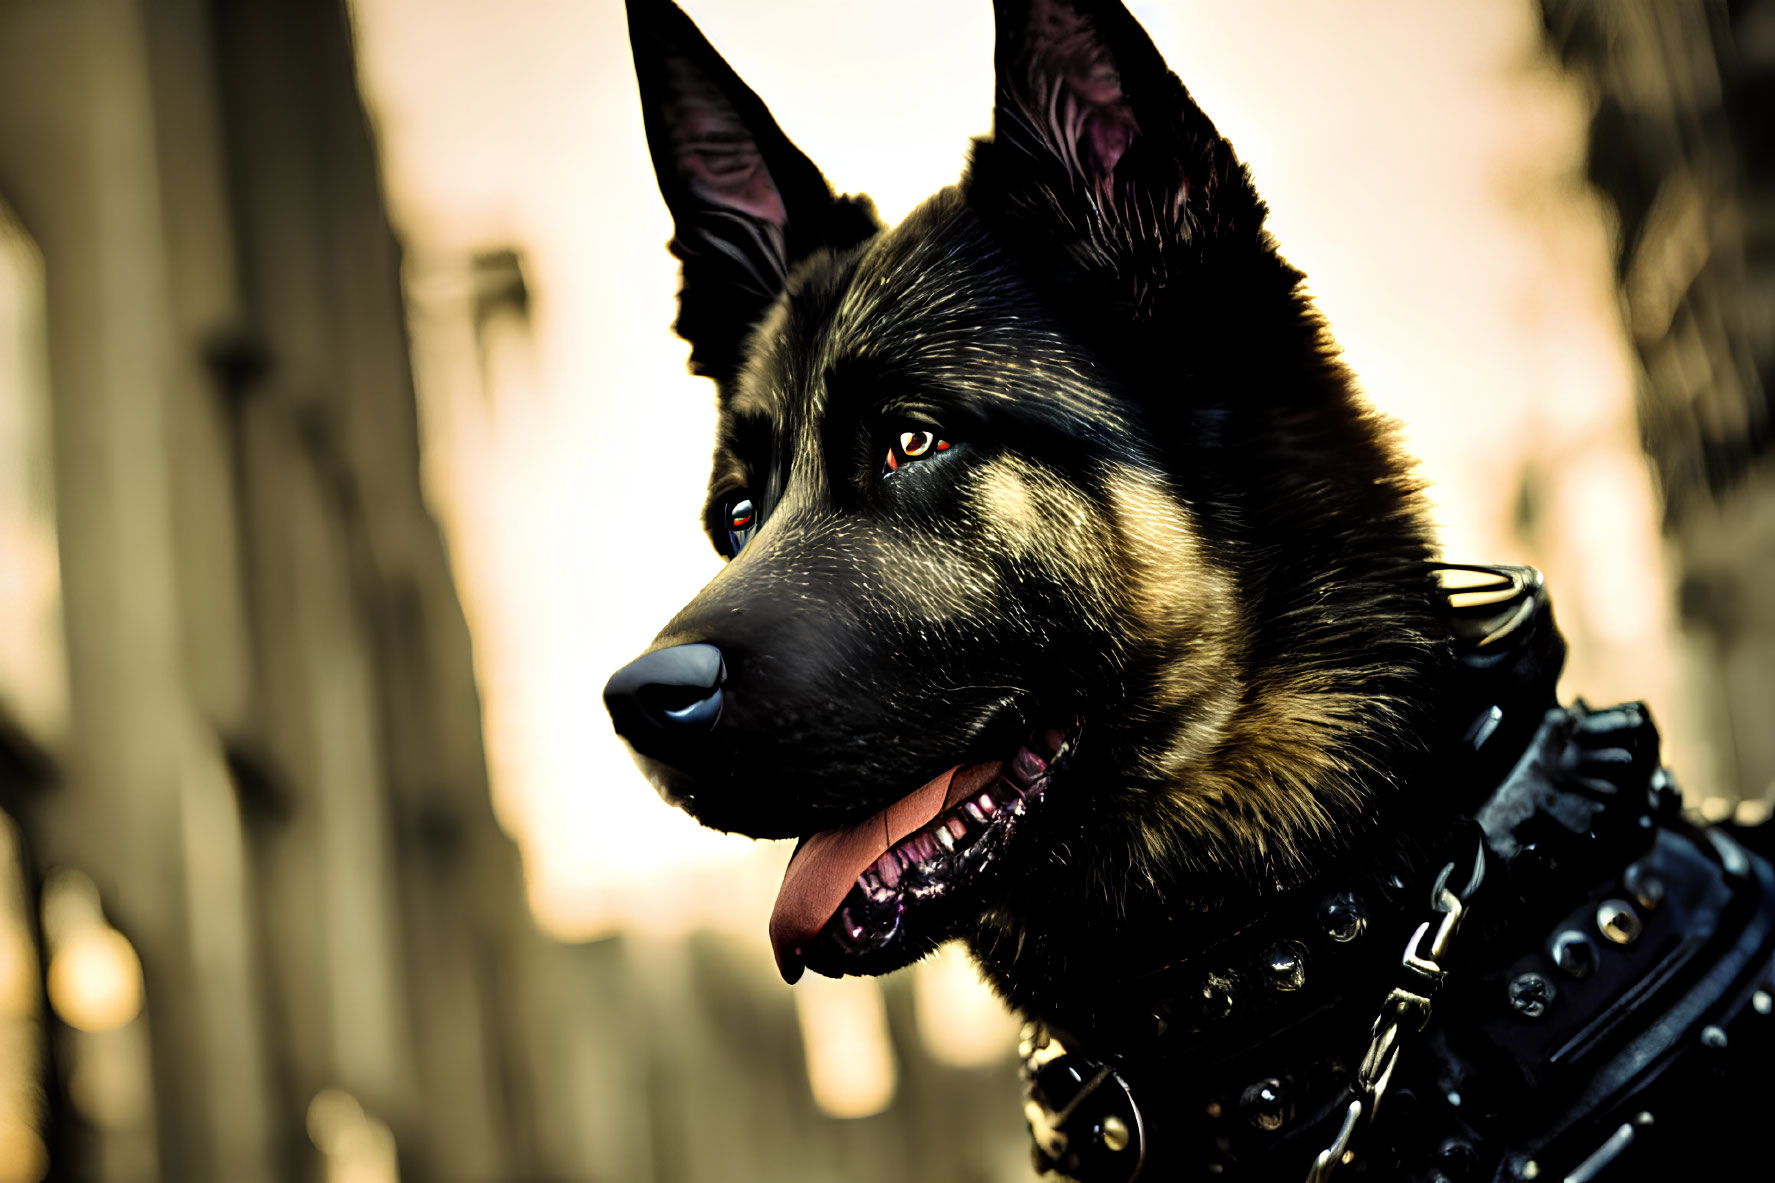 Black German Shepherd with studded collar in sharp profile against warm light background